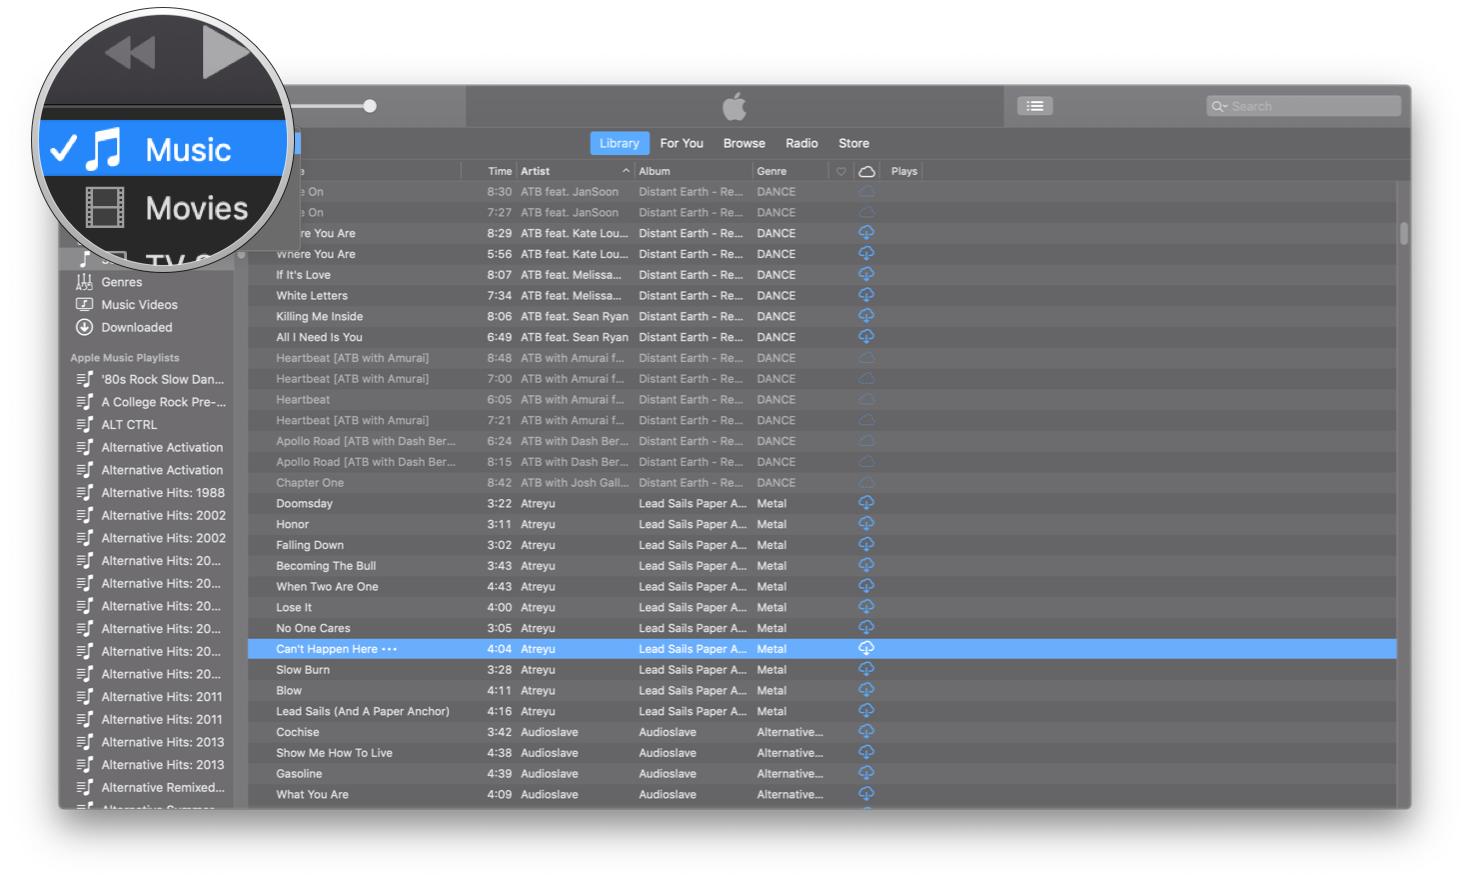 Select Music from the drop down menu